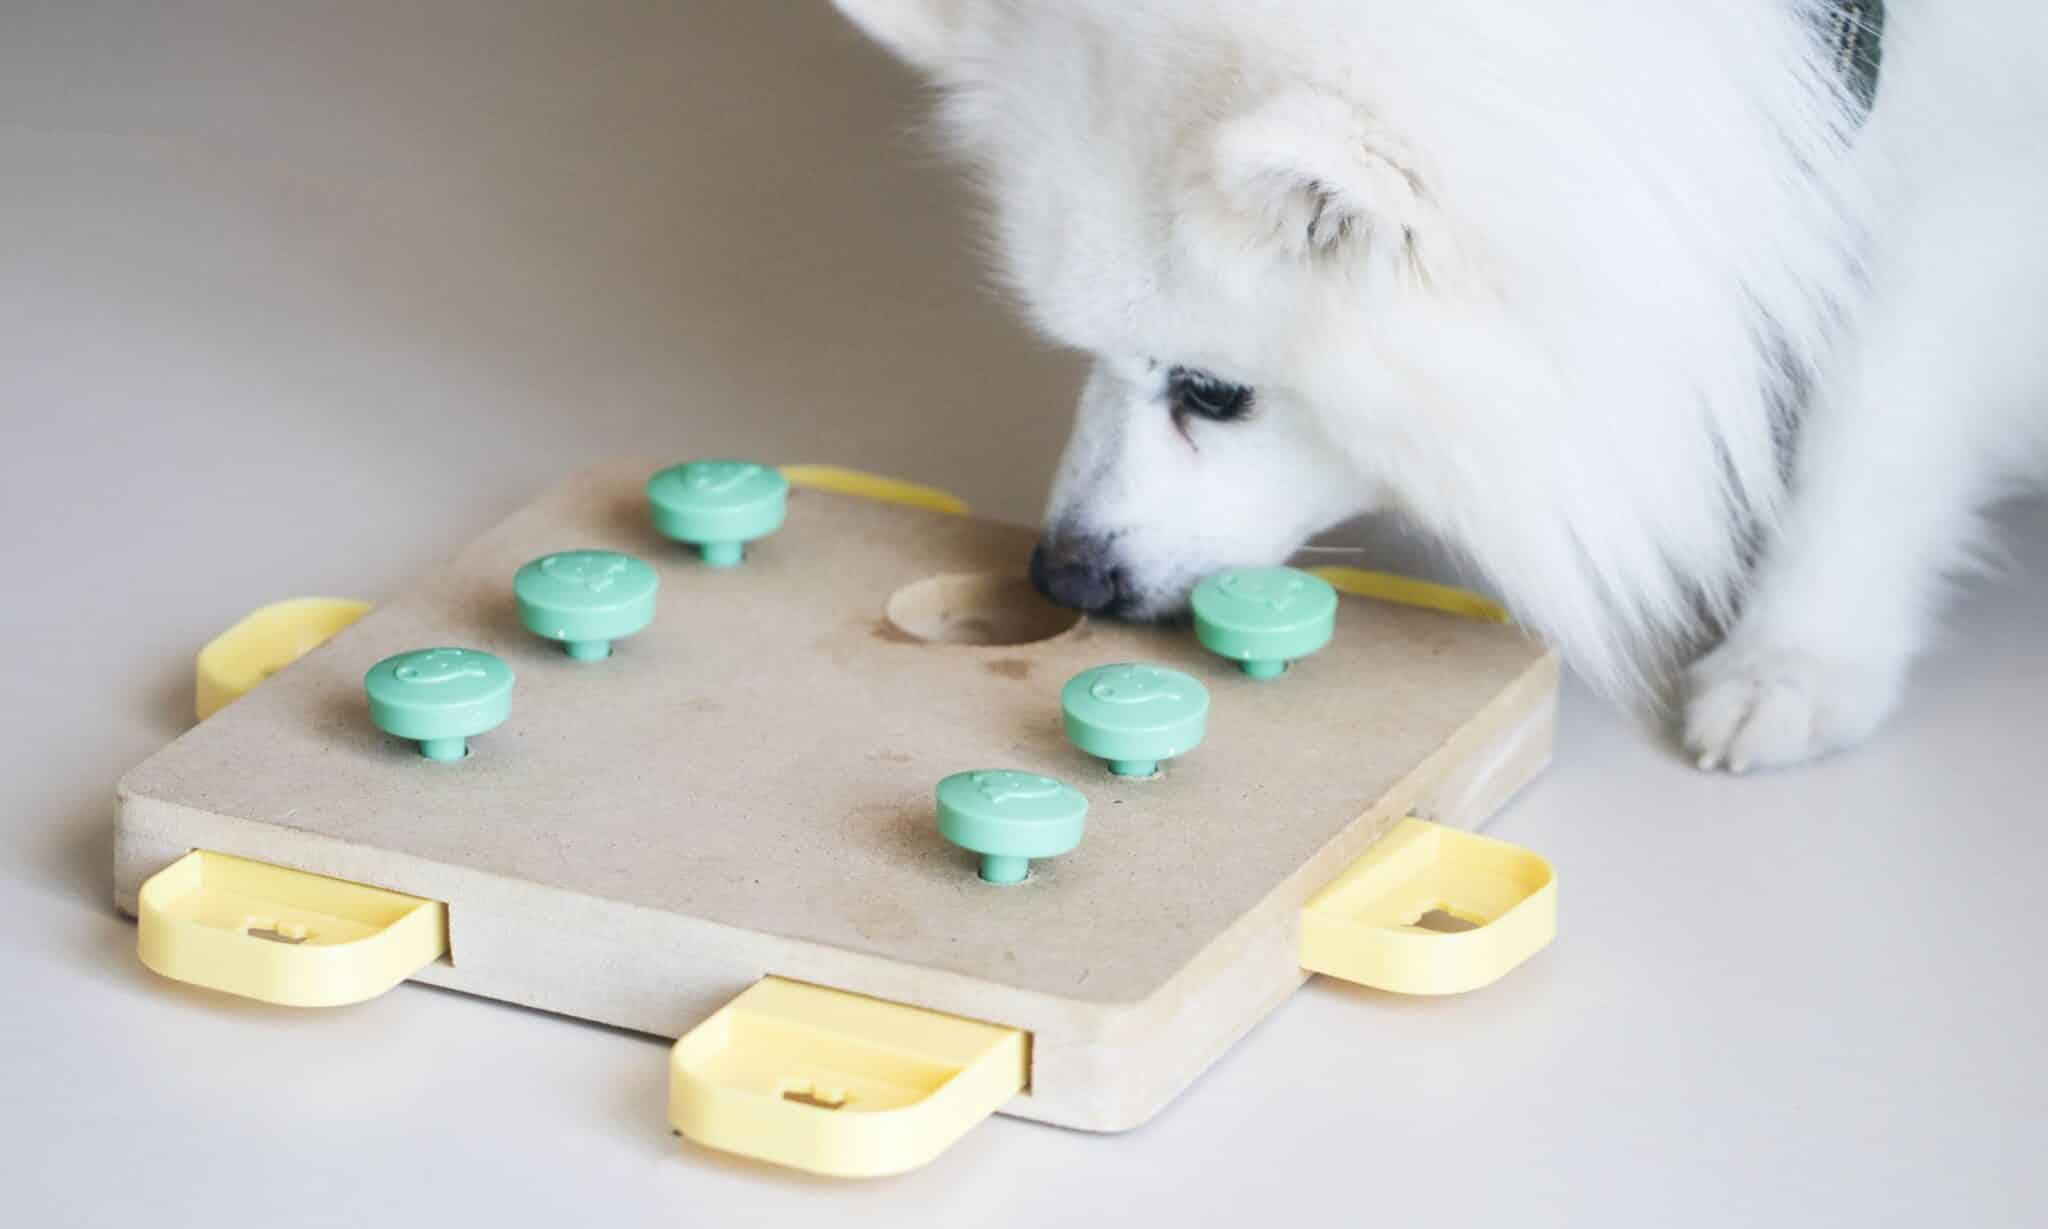 5 Nose Work Games for Dogs That Are Scentsational - Happy-Go-Doodle®